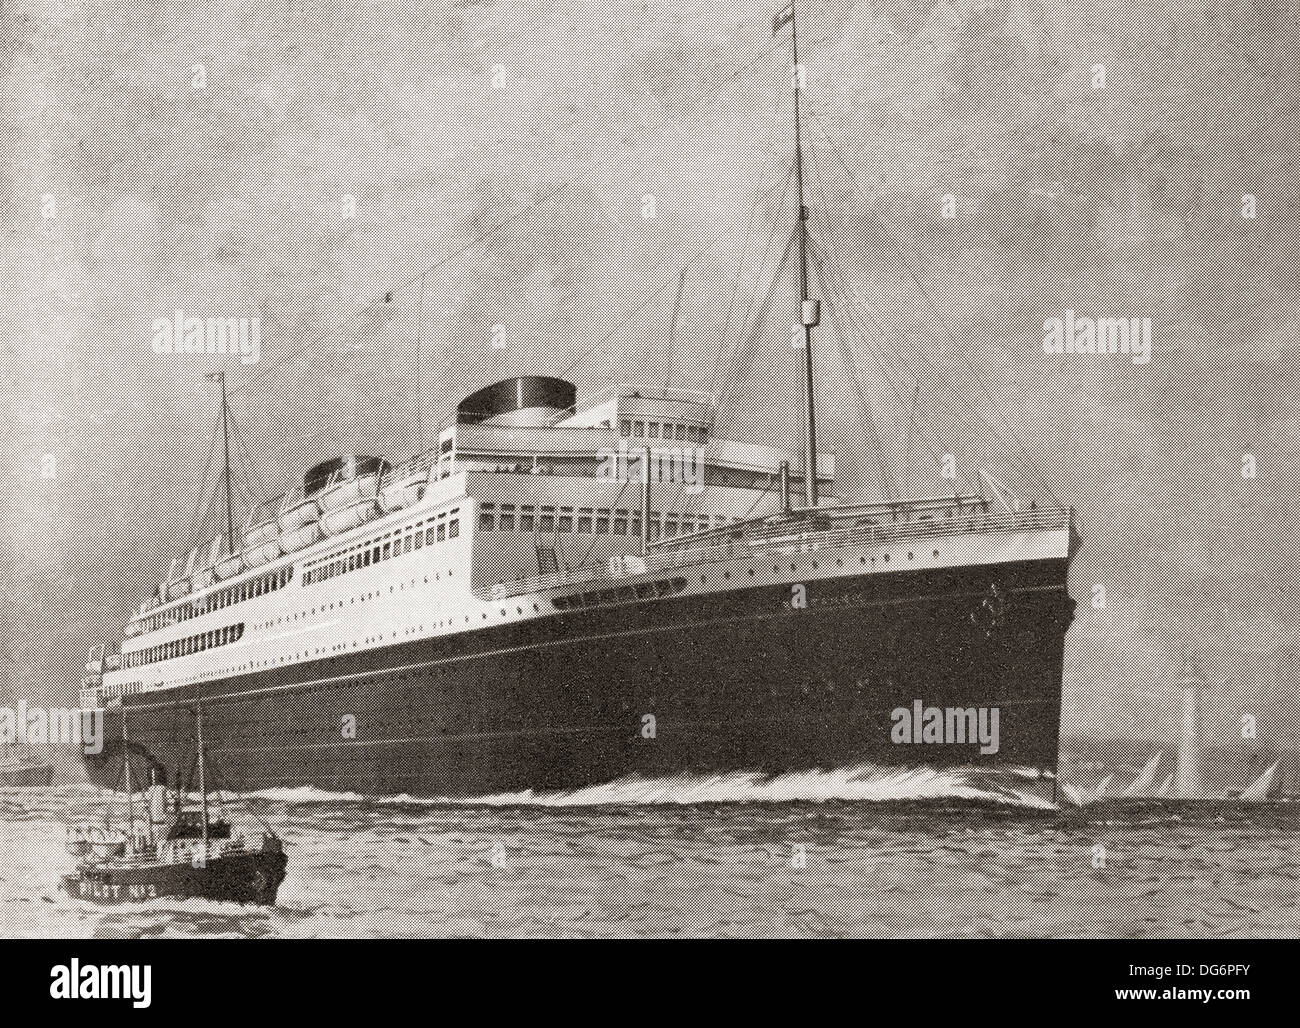 M.V. Britannic, ocean liner of the White Star Line. From The Romance of the Merchant Ship, published 1931. Stock Photo